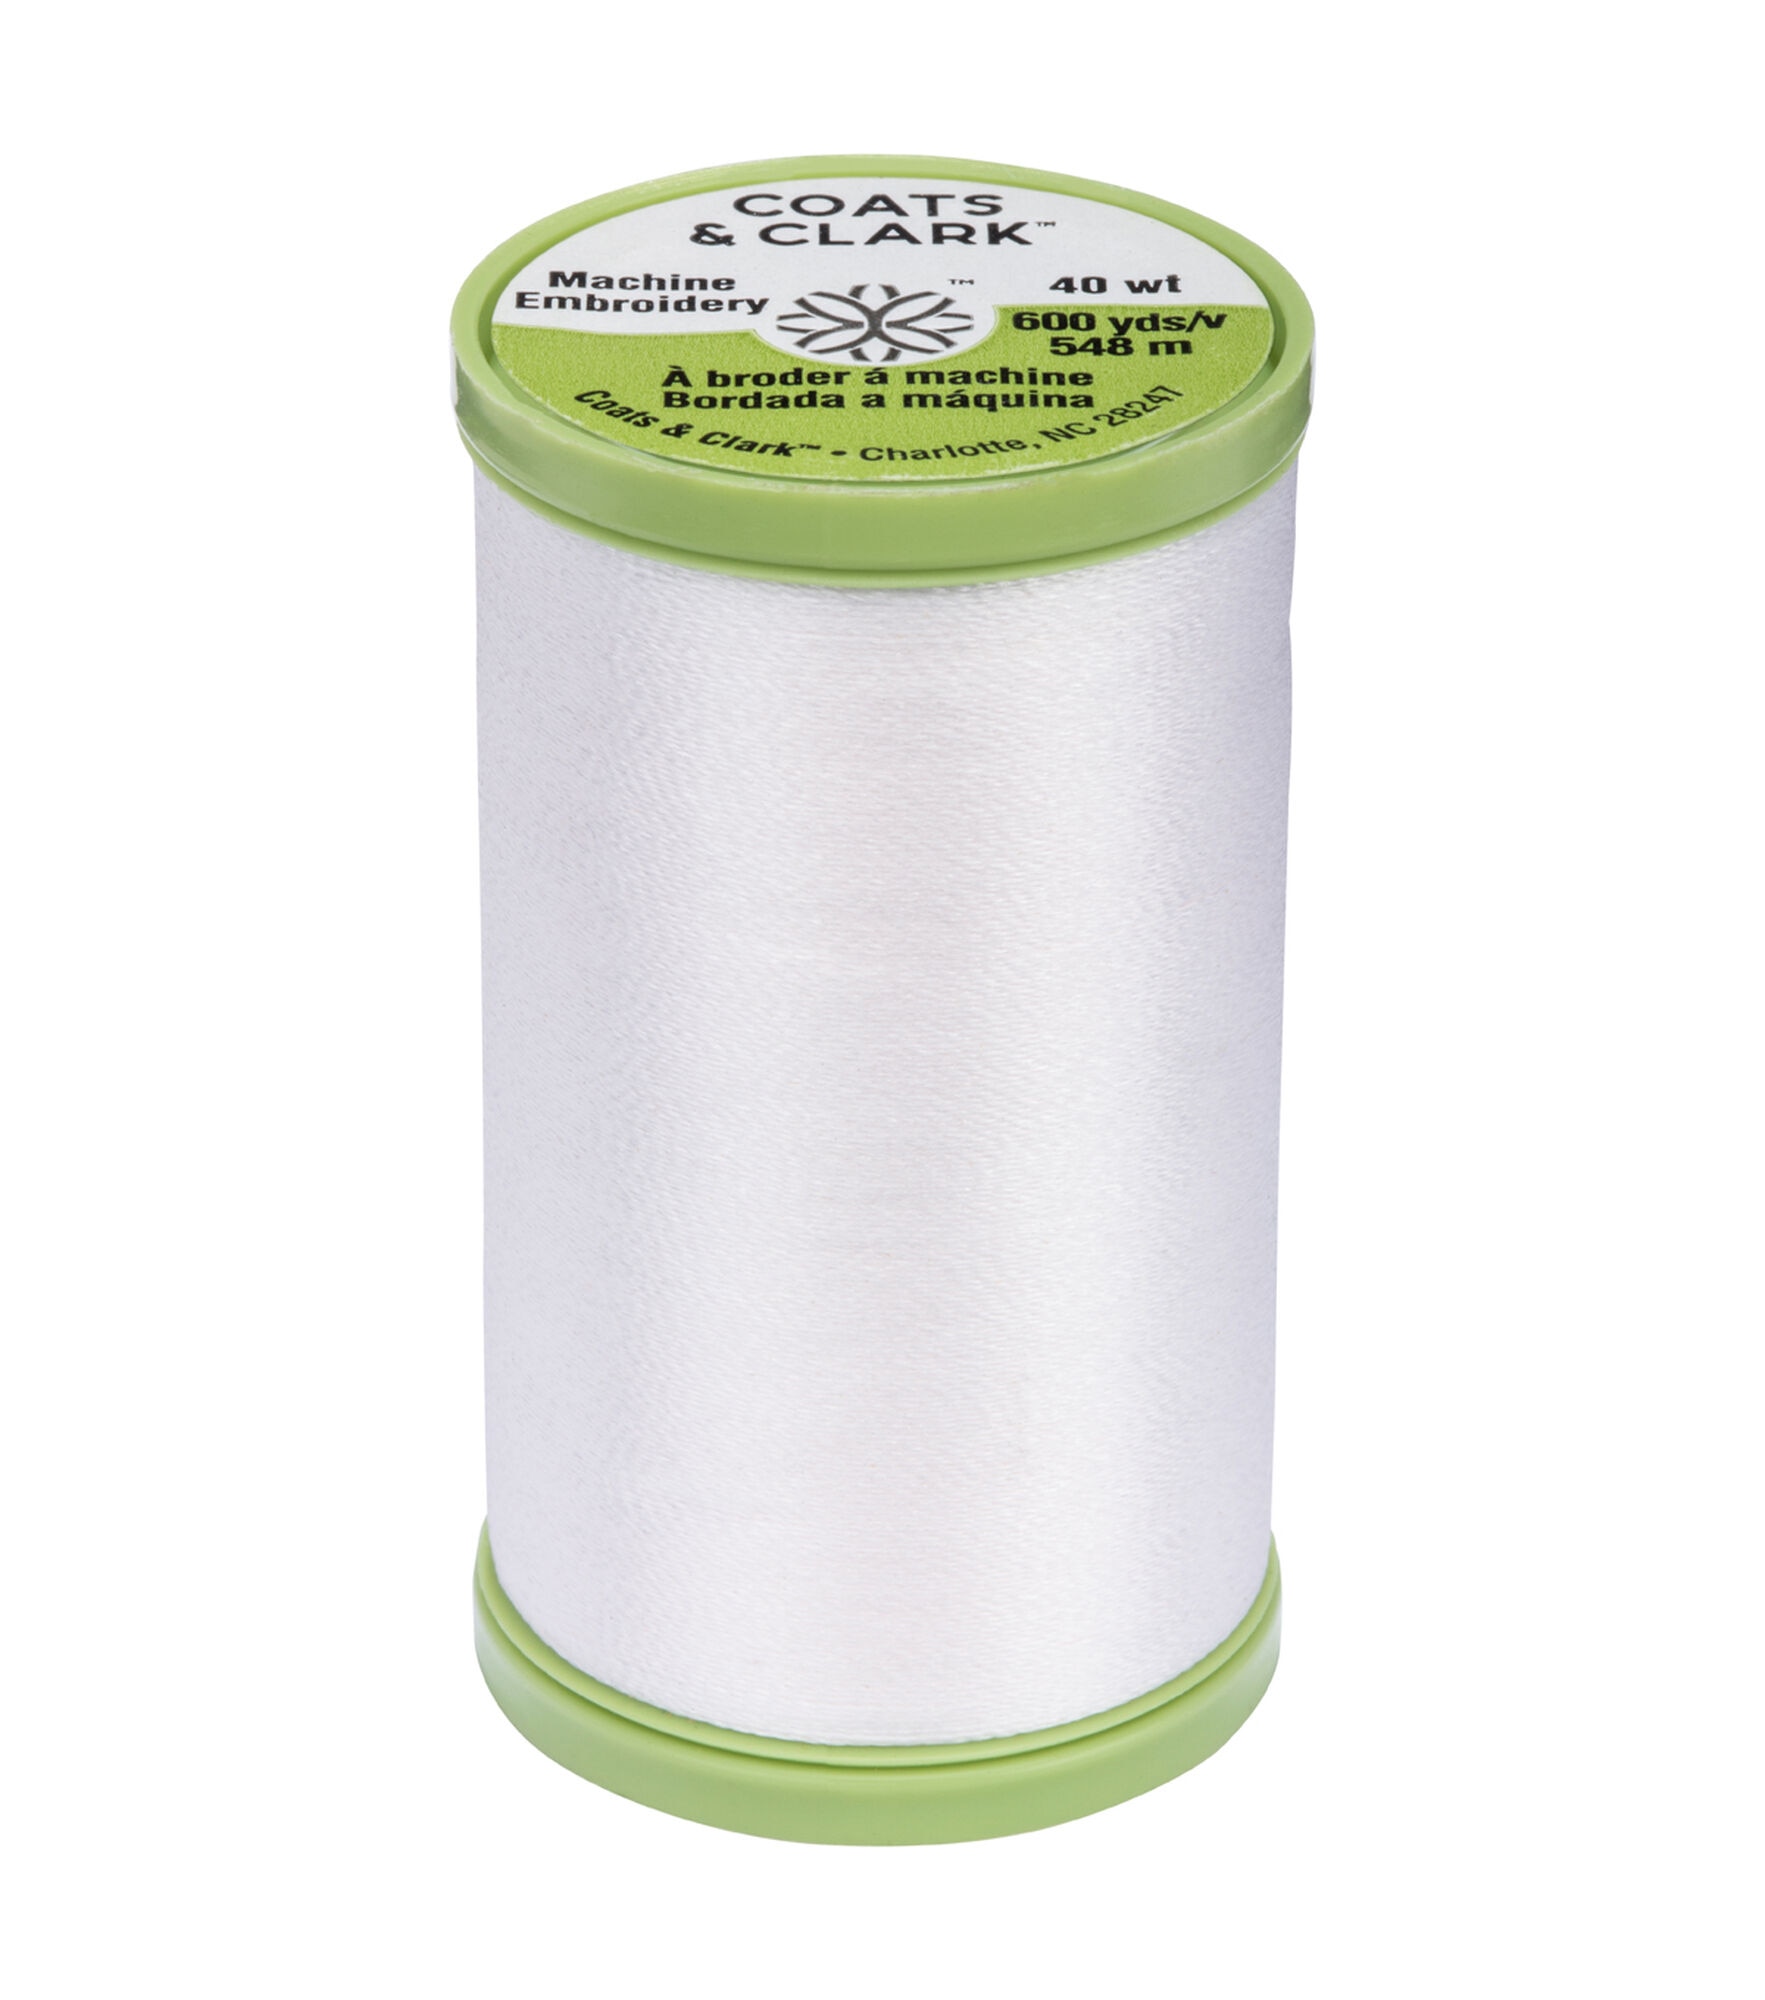 Coats Decorative Sewing Threads, Decorative Stitching & Embroidery